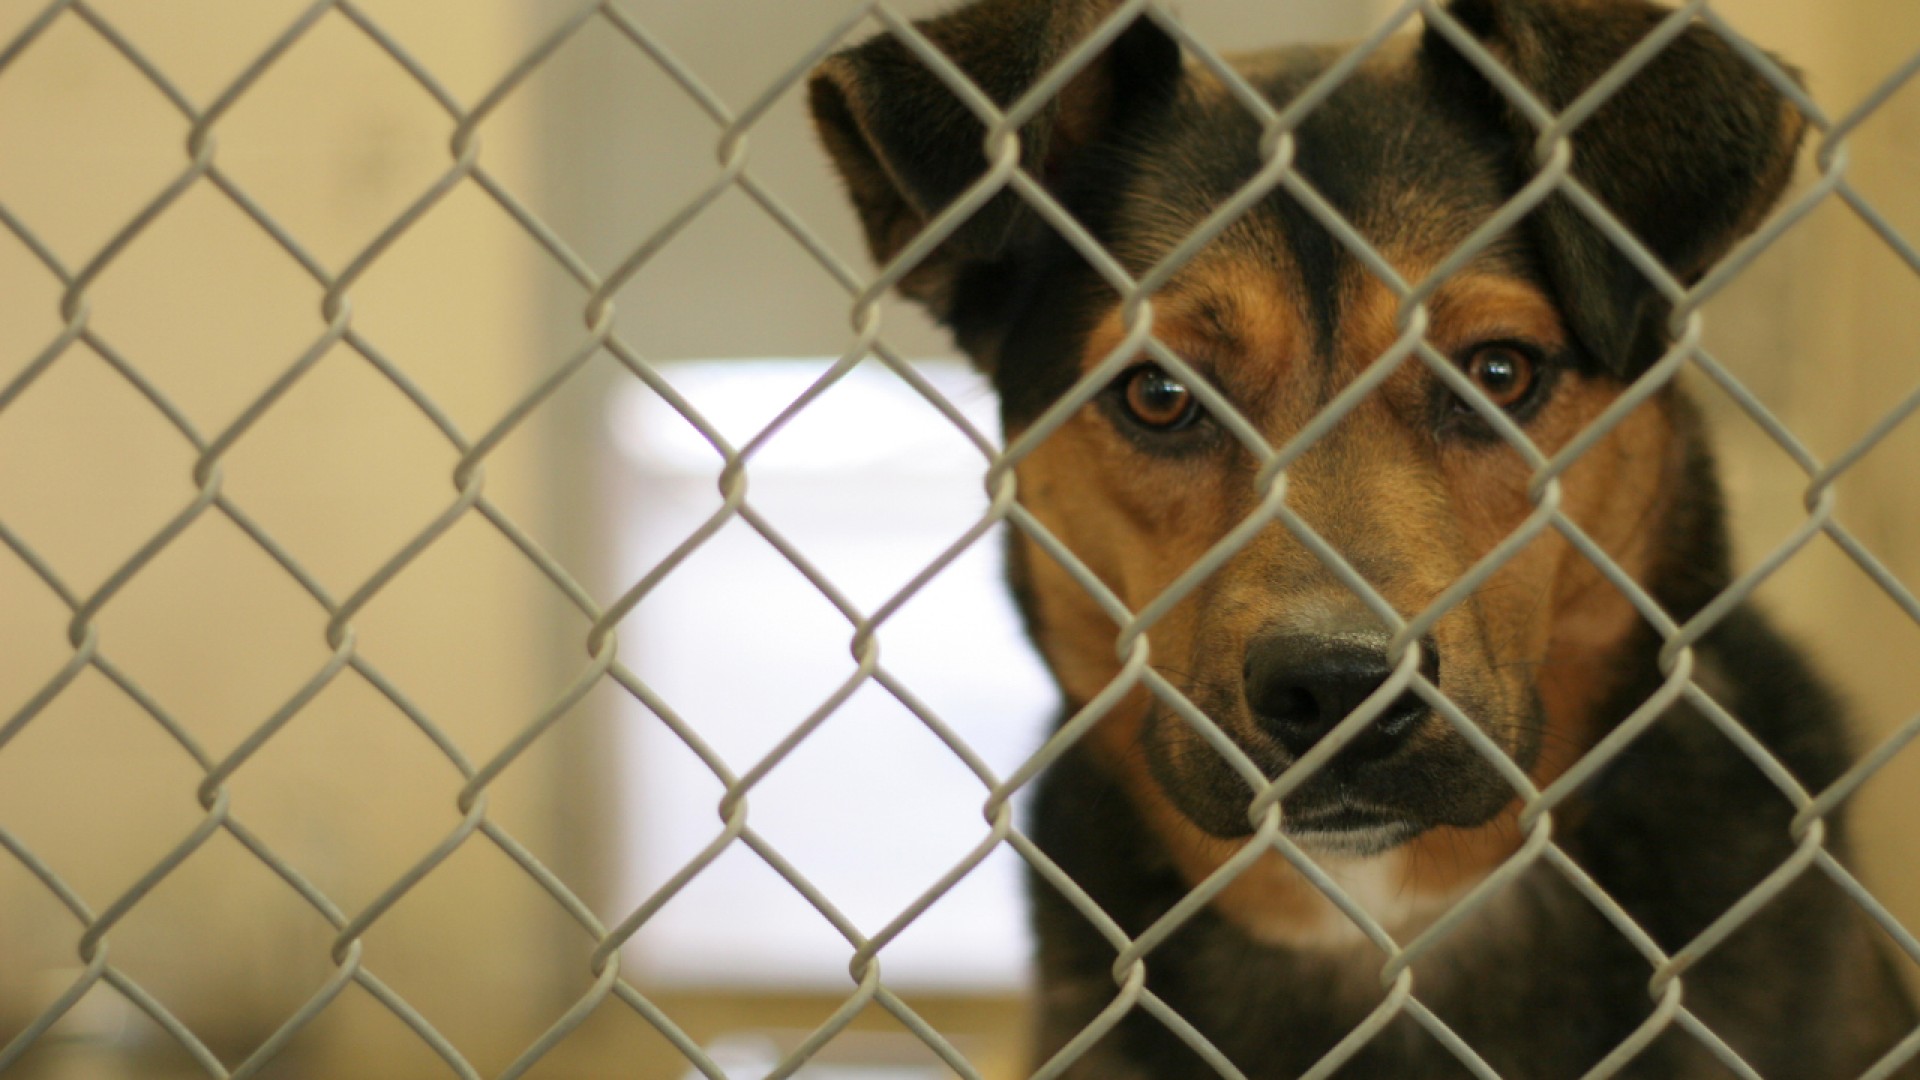 $23 for 2023: BARC slashes adoption fees as shelter reaches 'critical point'